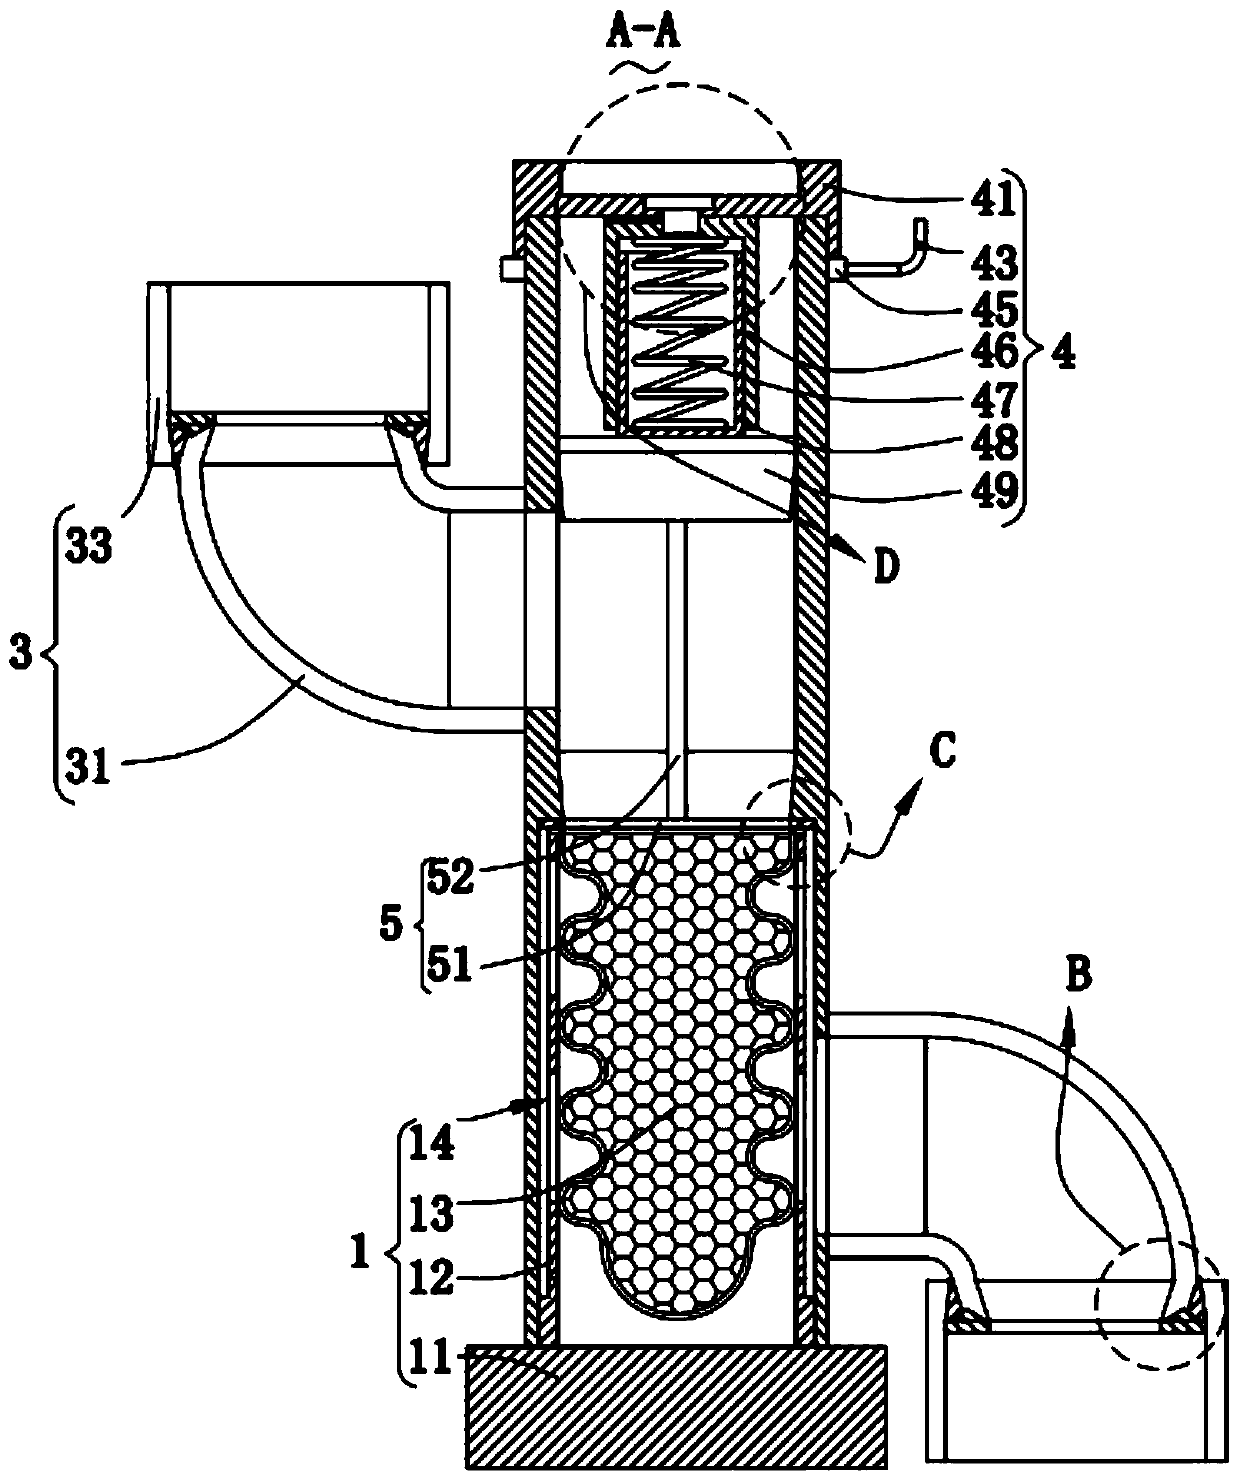 Thermal pipeline filtering device